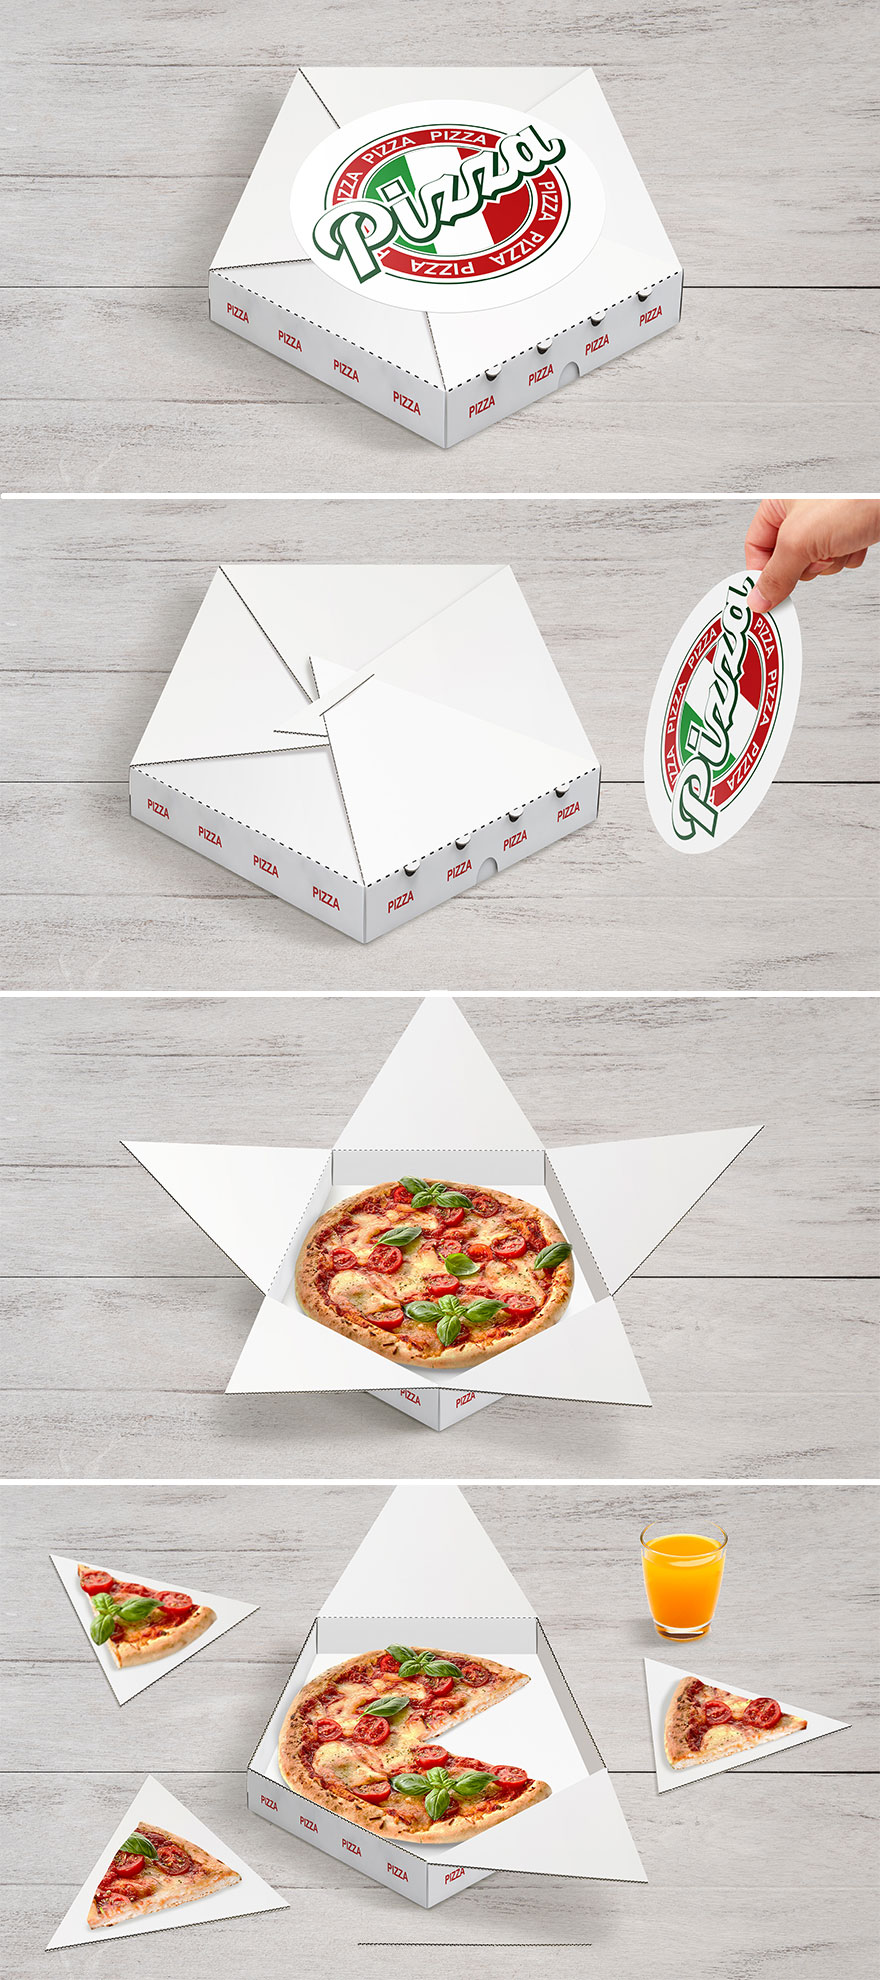 I Came Up With A Pizza Package Where Part Of The Box Becomes A Plate. I Would Like To Be Hired Somewhere